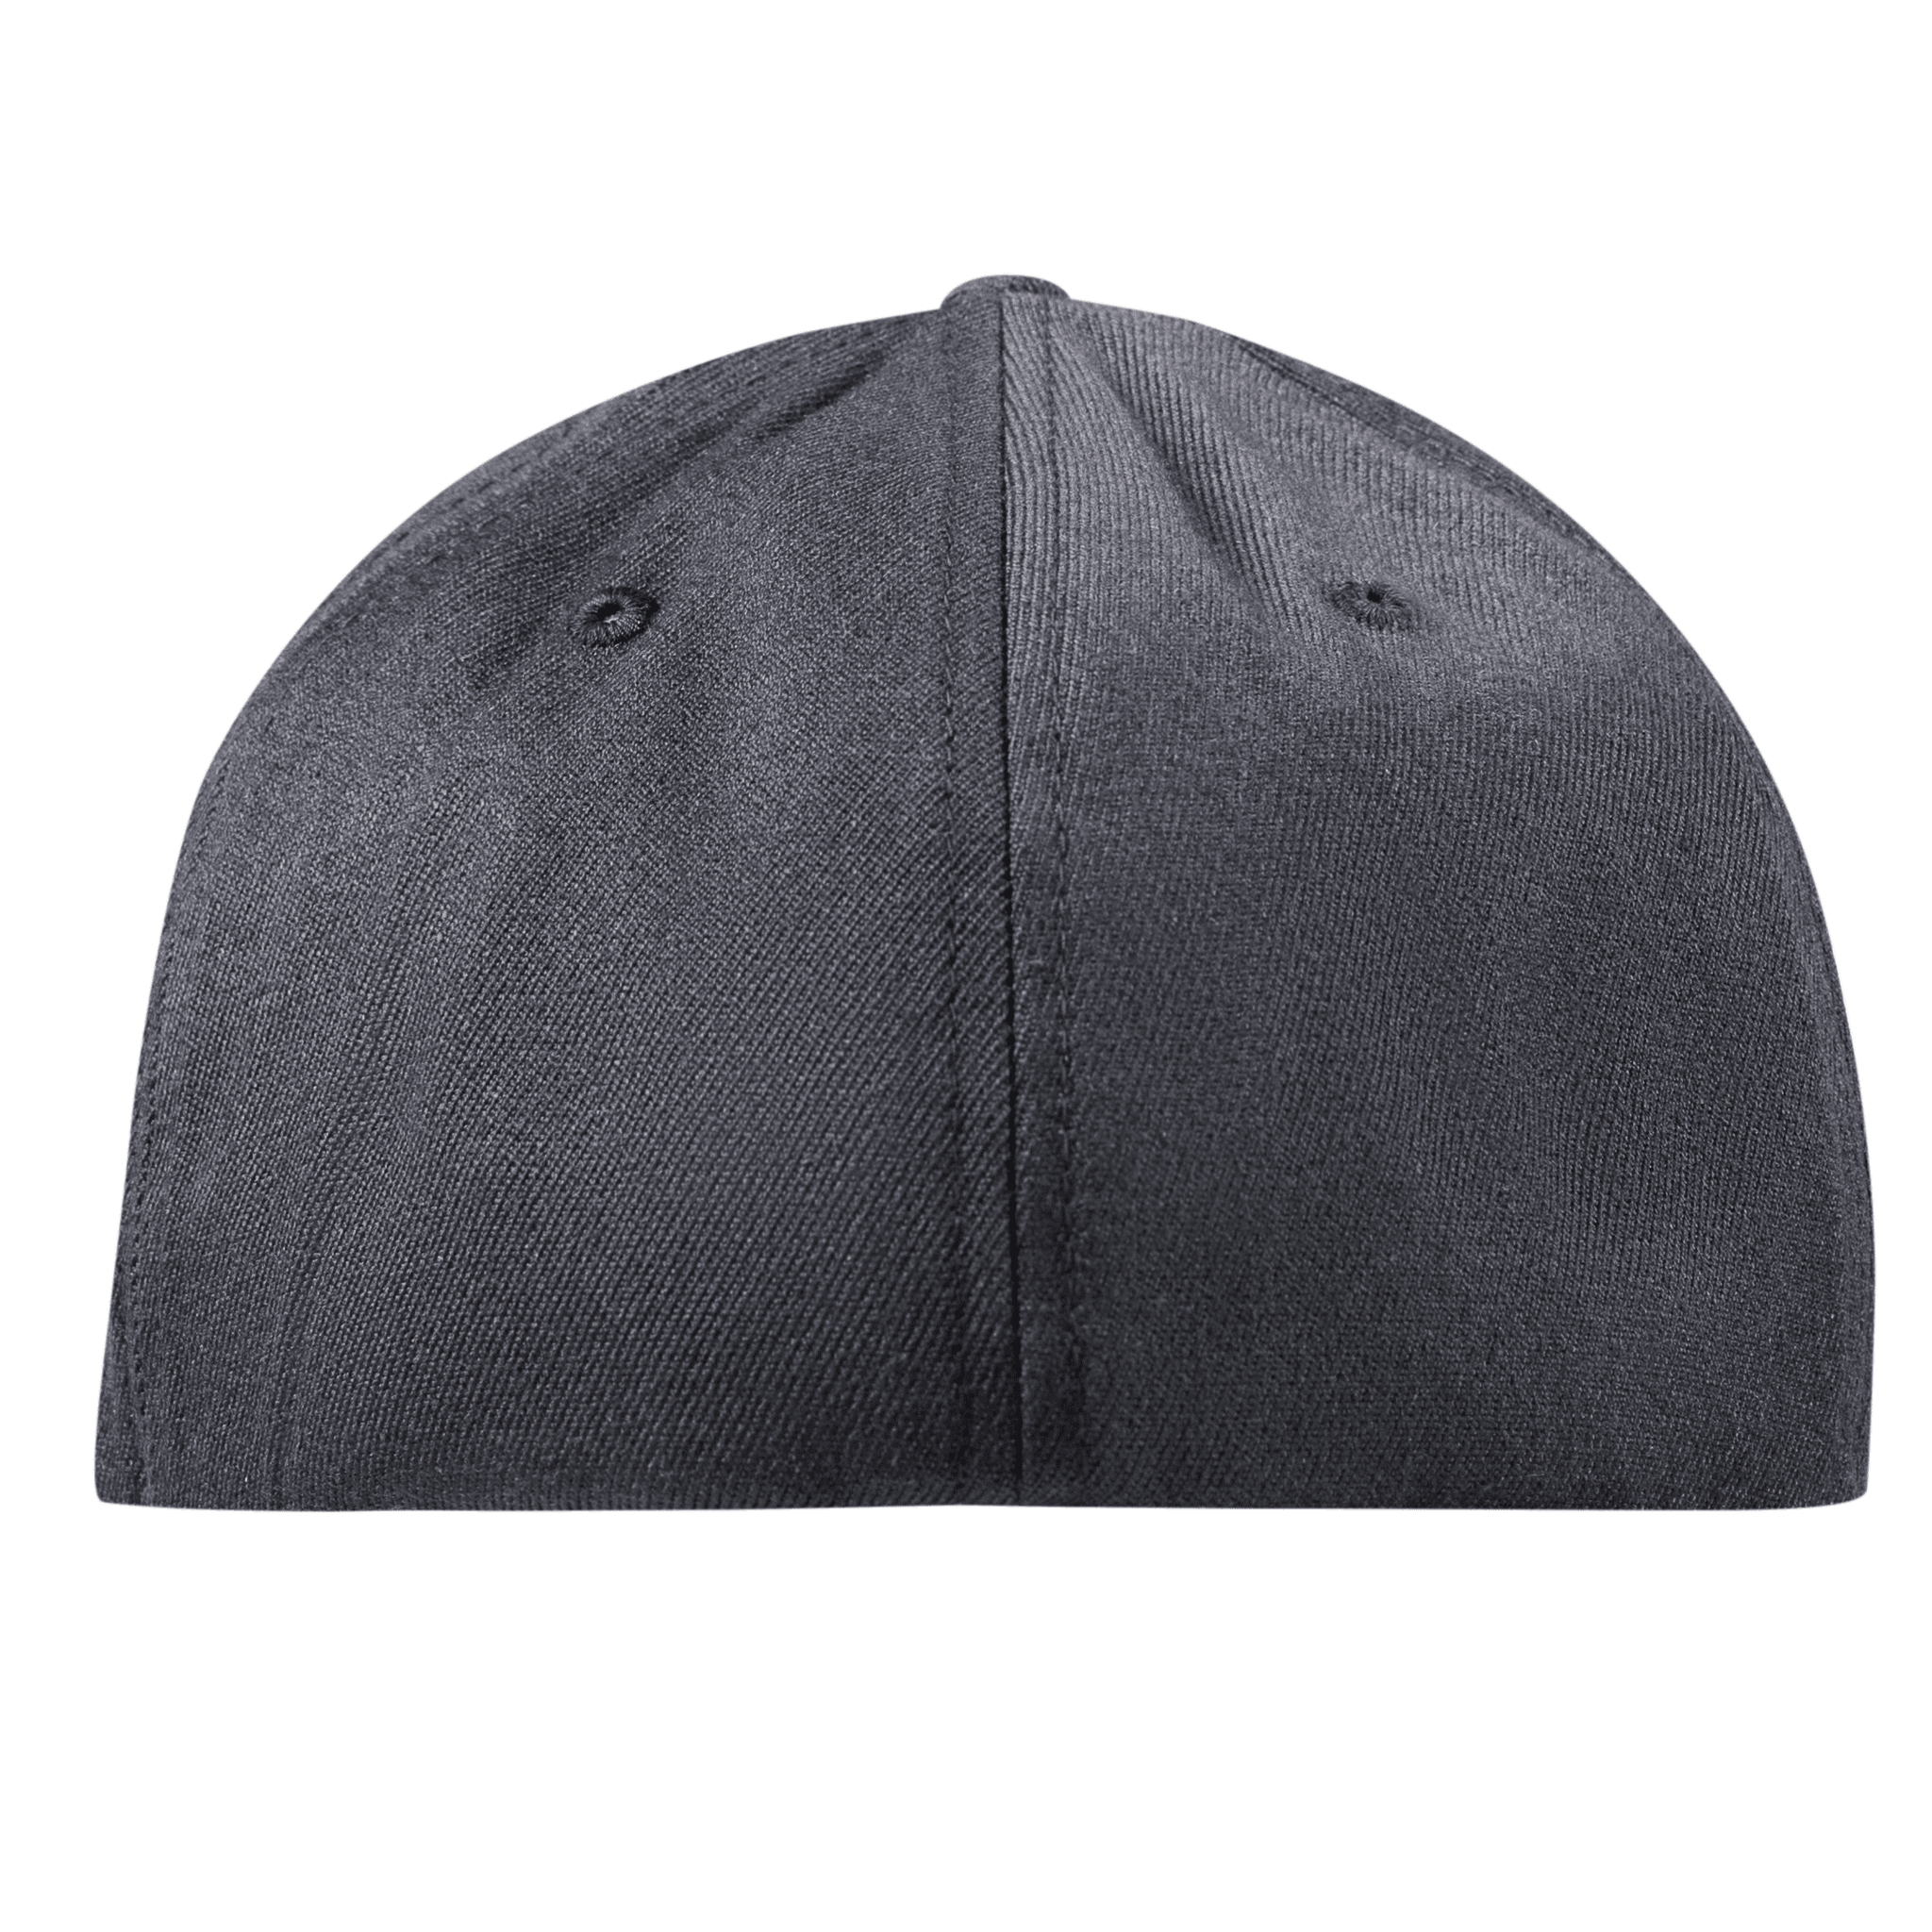 Oklahoma Patriot Flexfit Fitted Back Charcoal